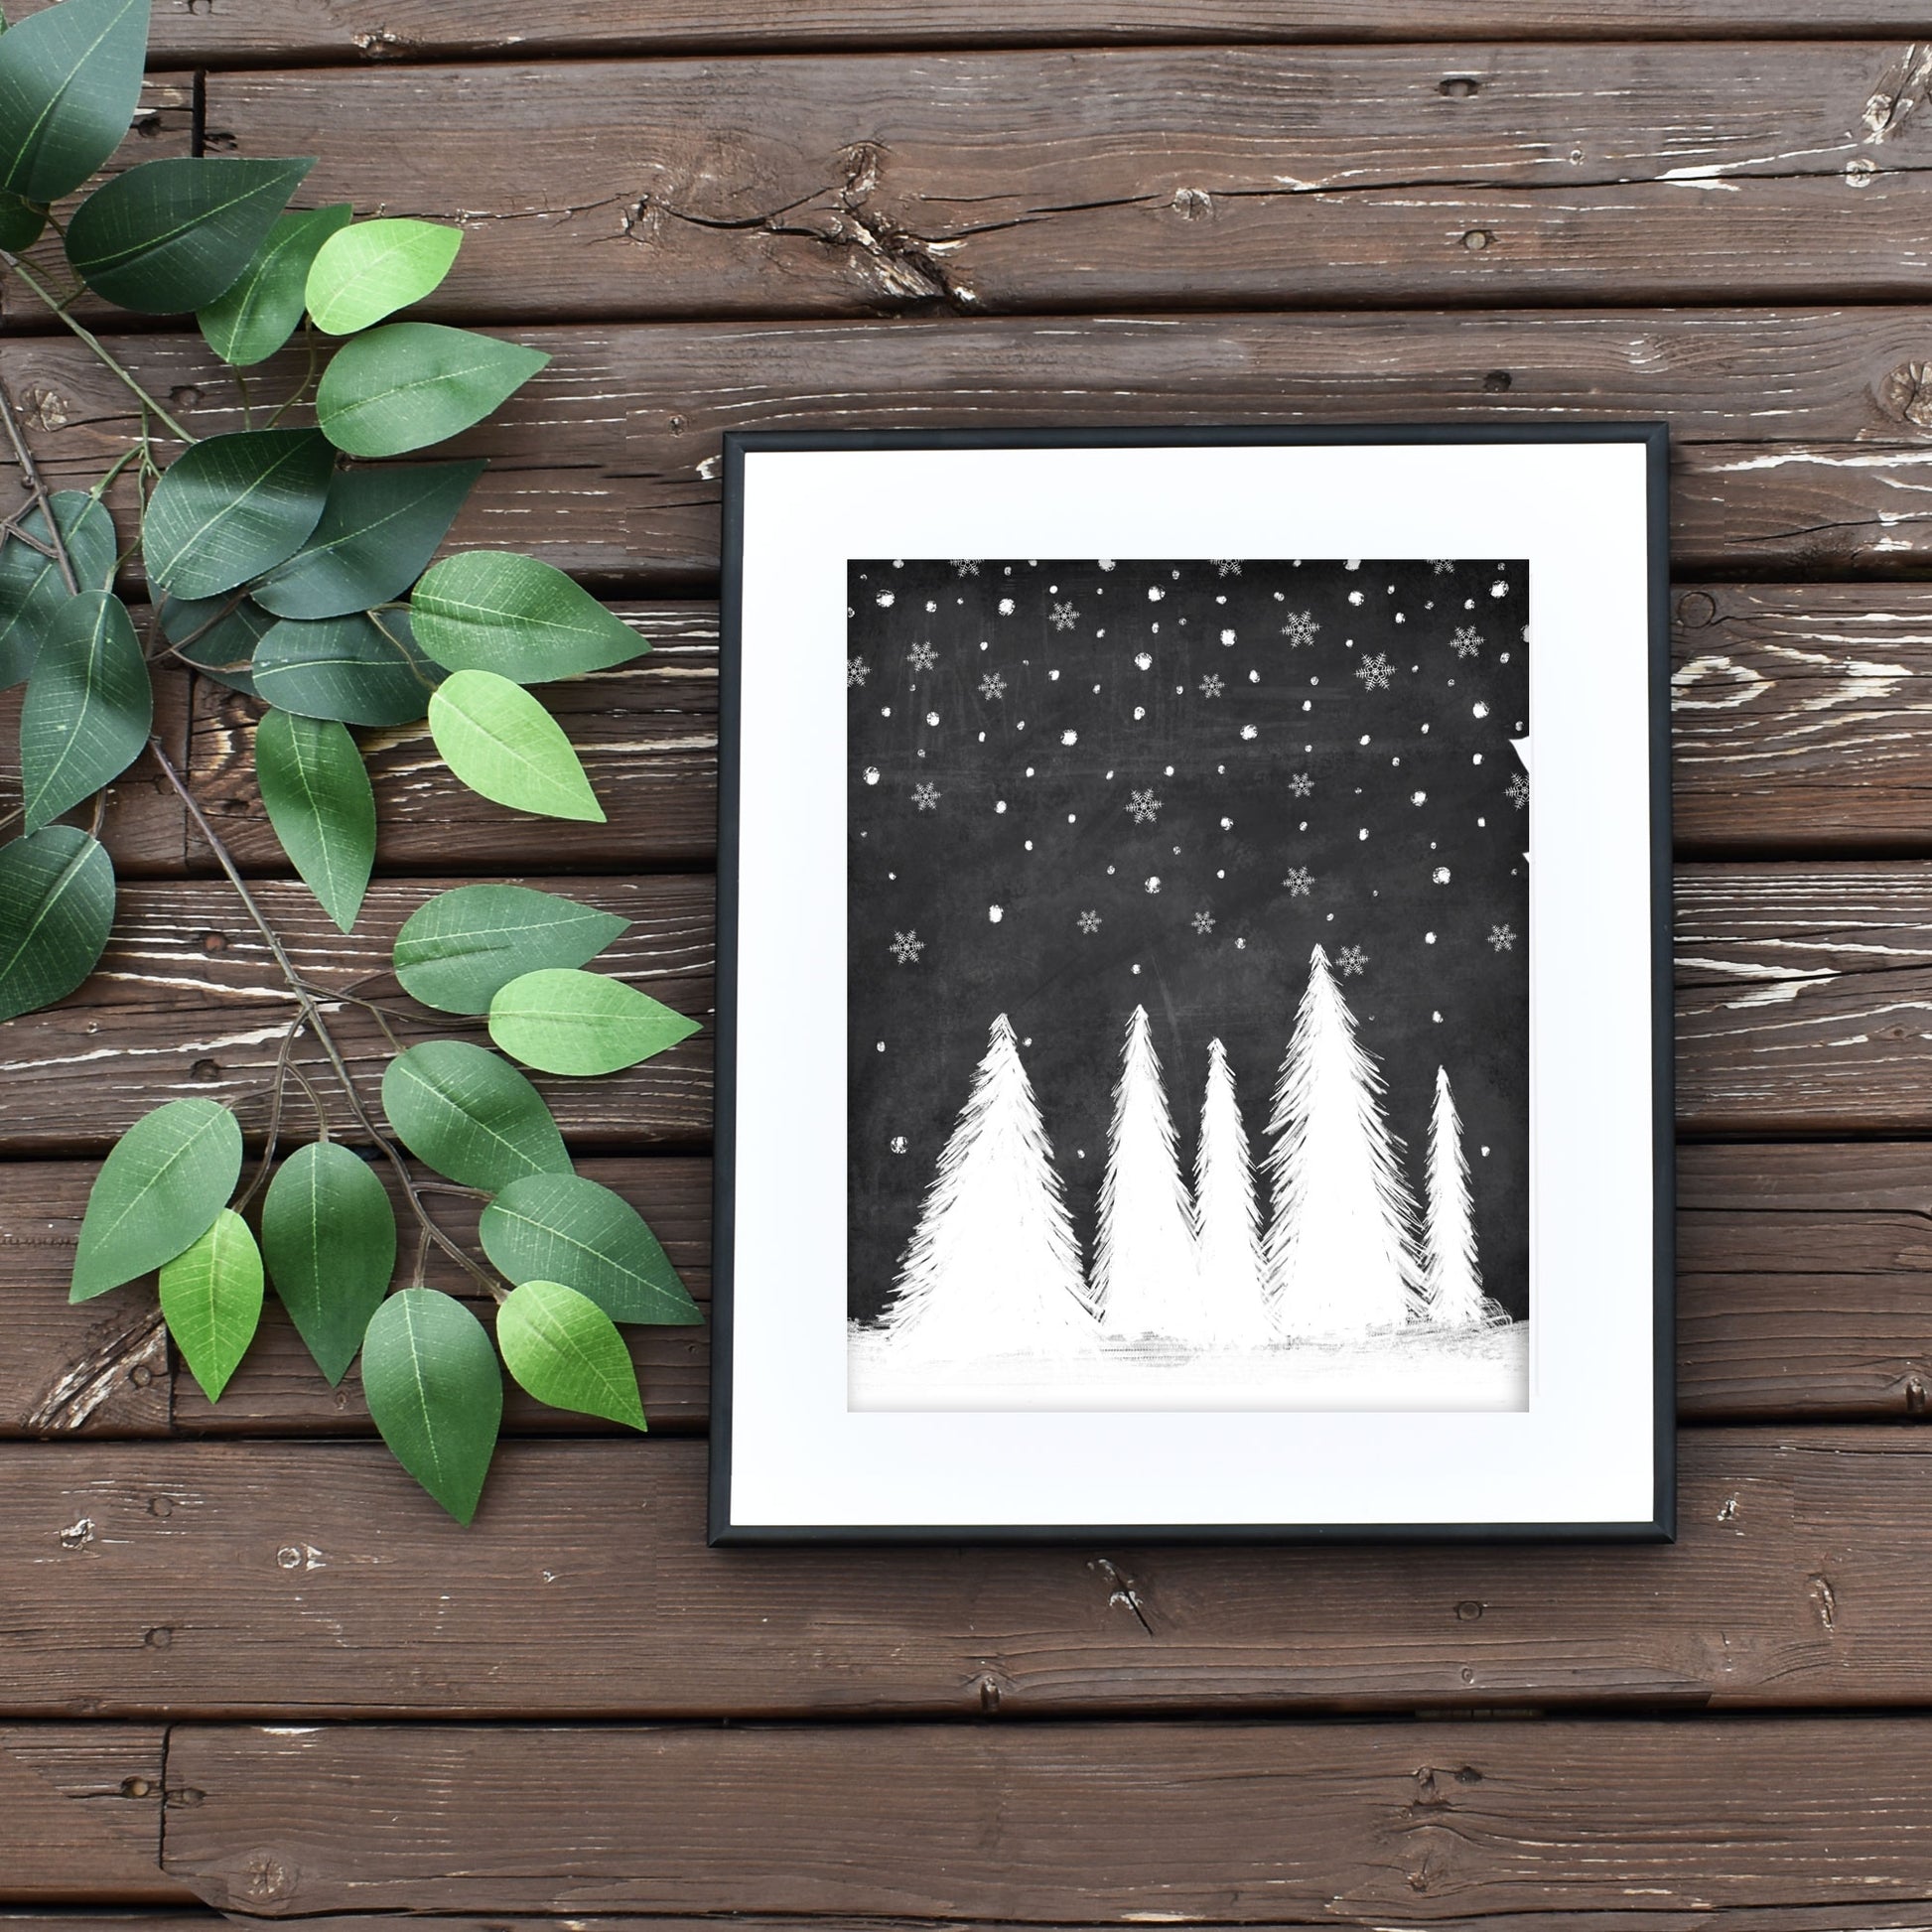 Easy Printable Snowy Winter Forest Art Christmas Home Decor on a Budget